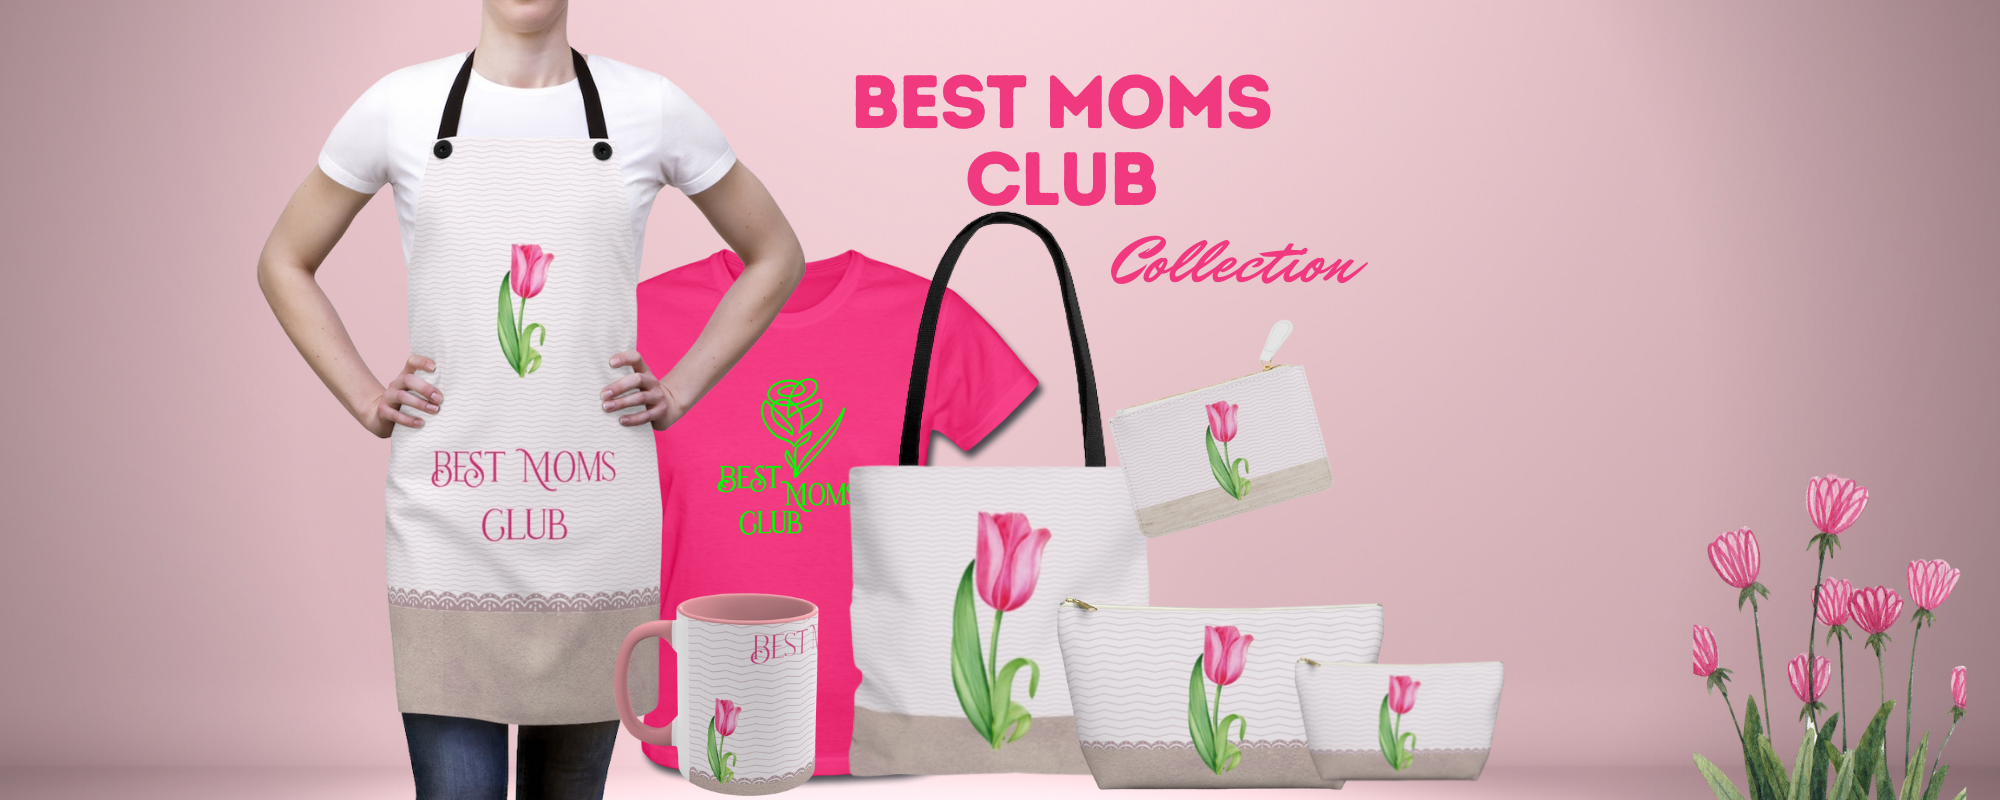 Best Moms Club Collection